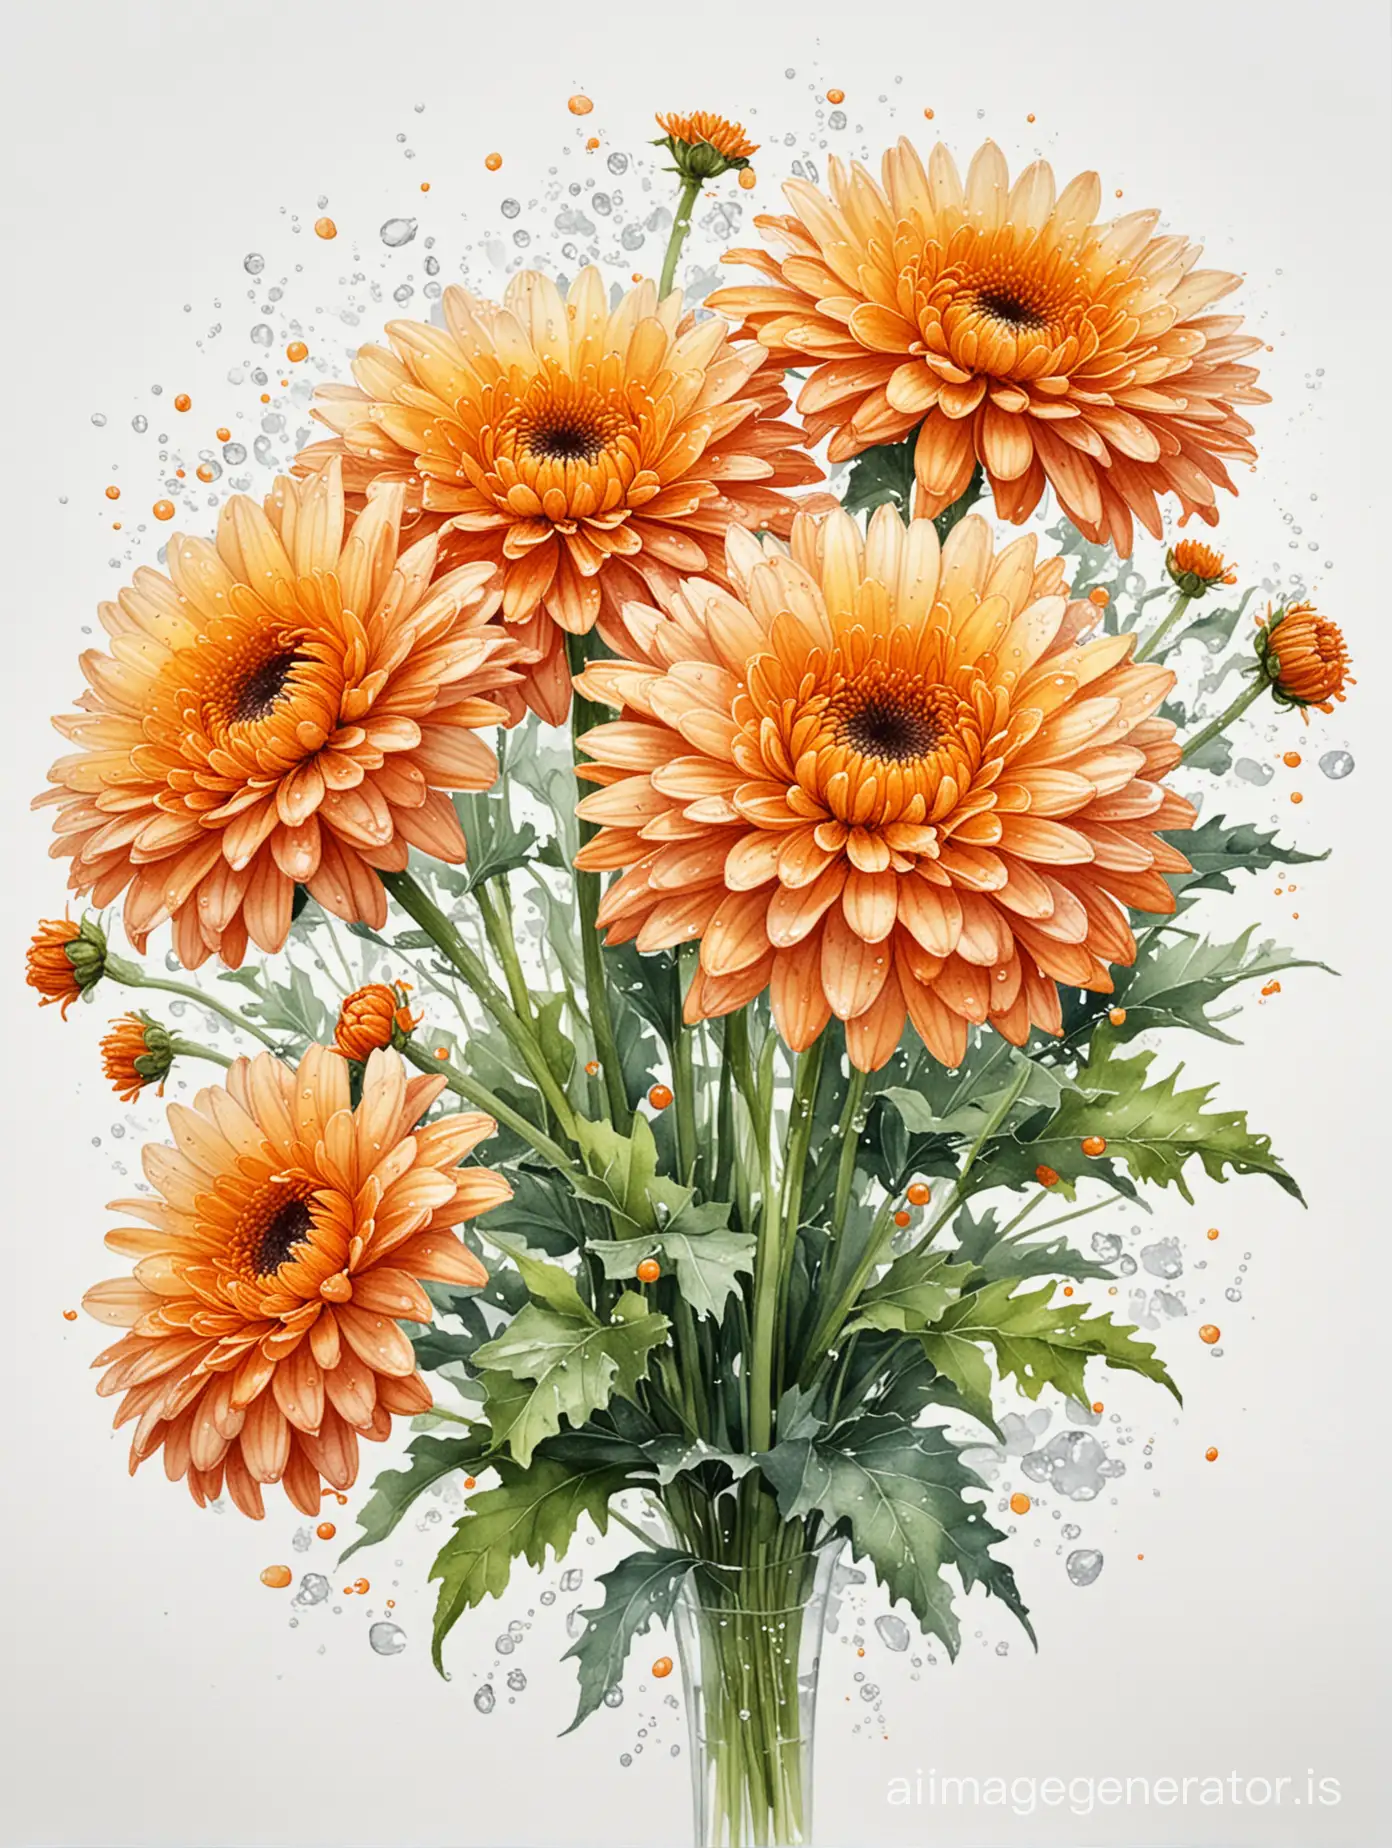 Orange-Terry-Chrysanthemum-Bouquet-with-Dew-Drops-on-White-Background